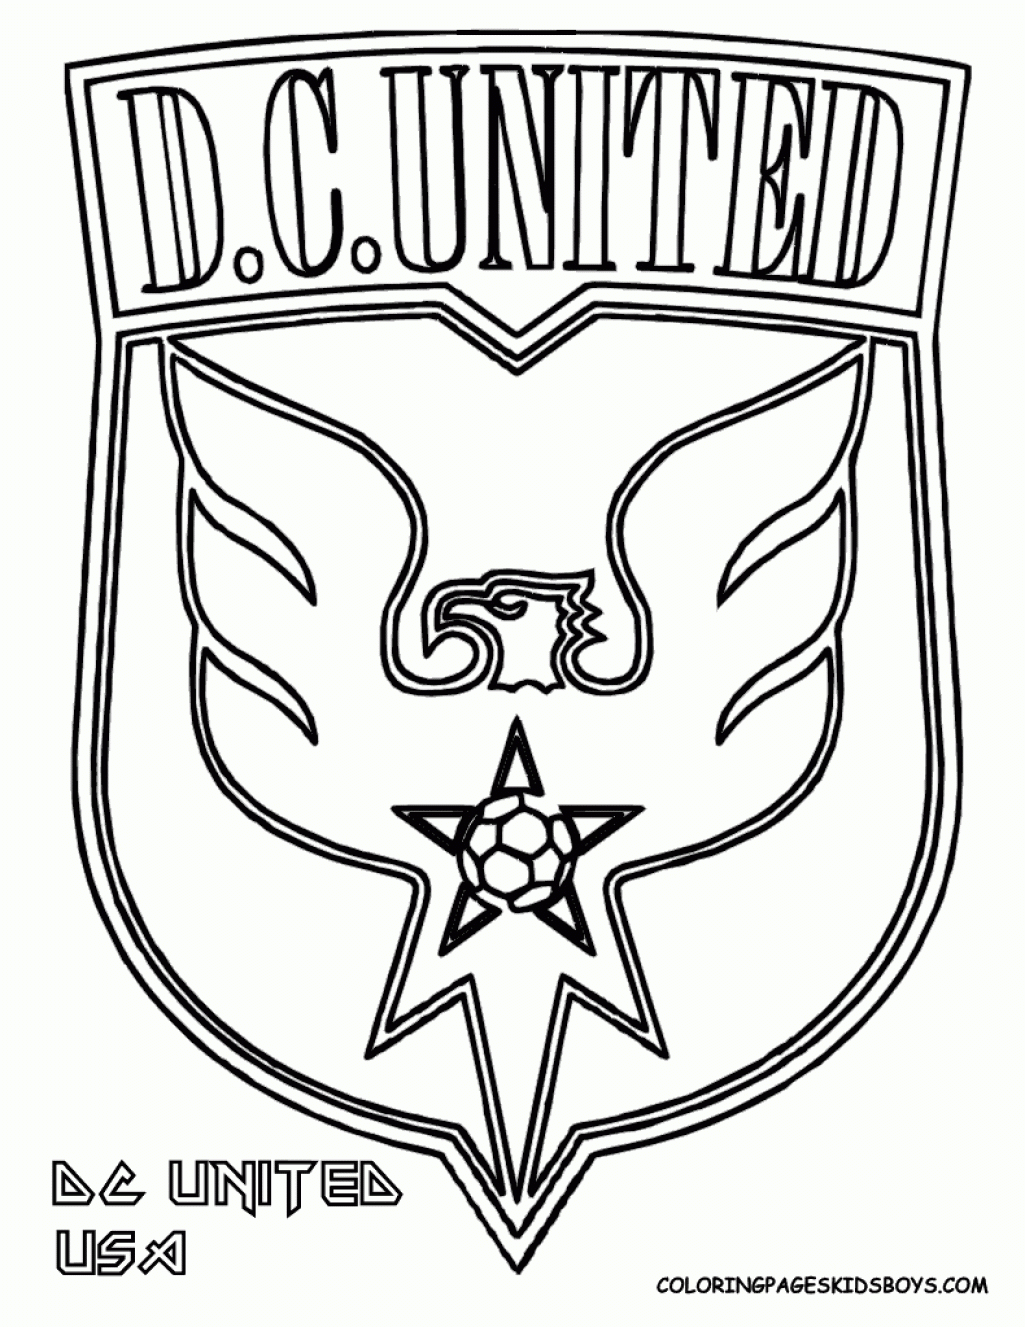 Football Jersey Coloring Pages | Resume Format Download Pdf